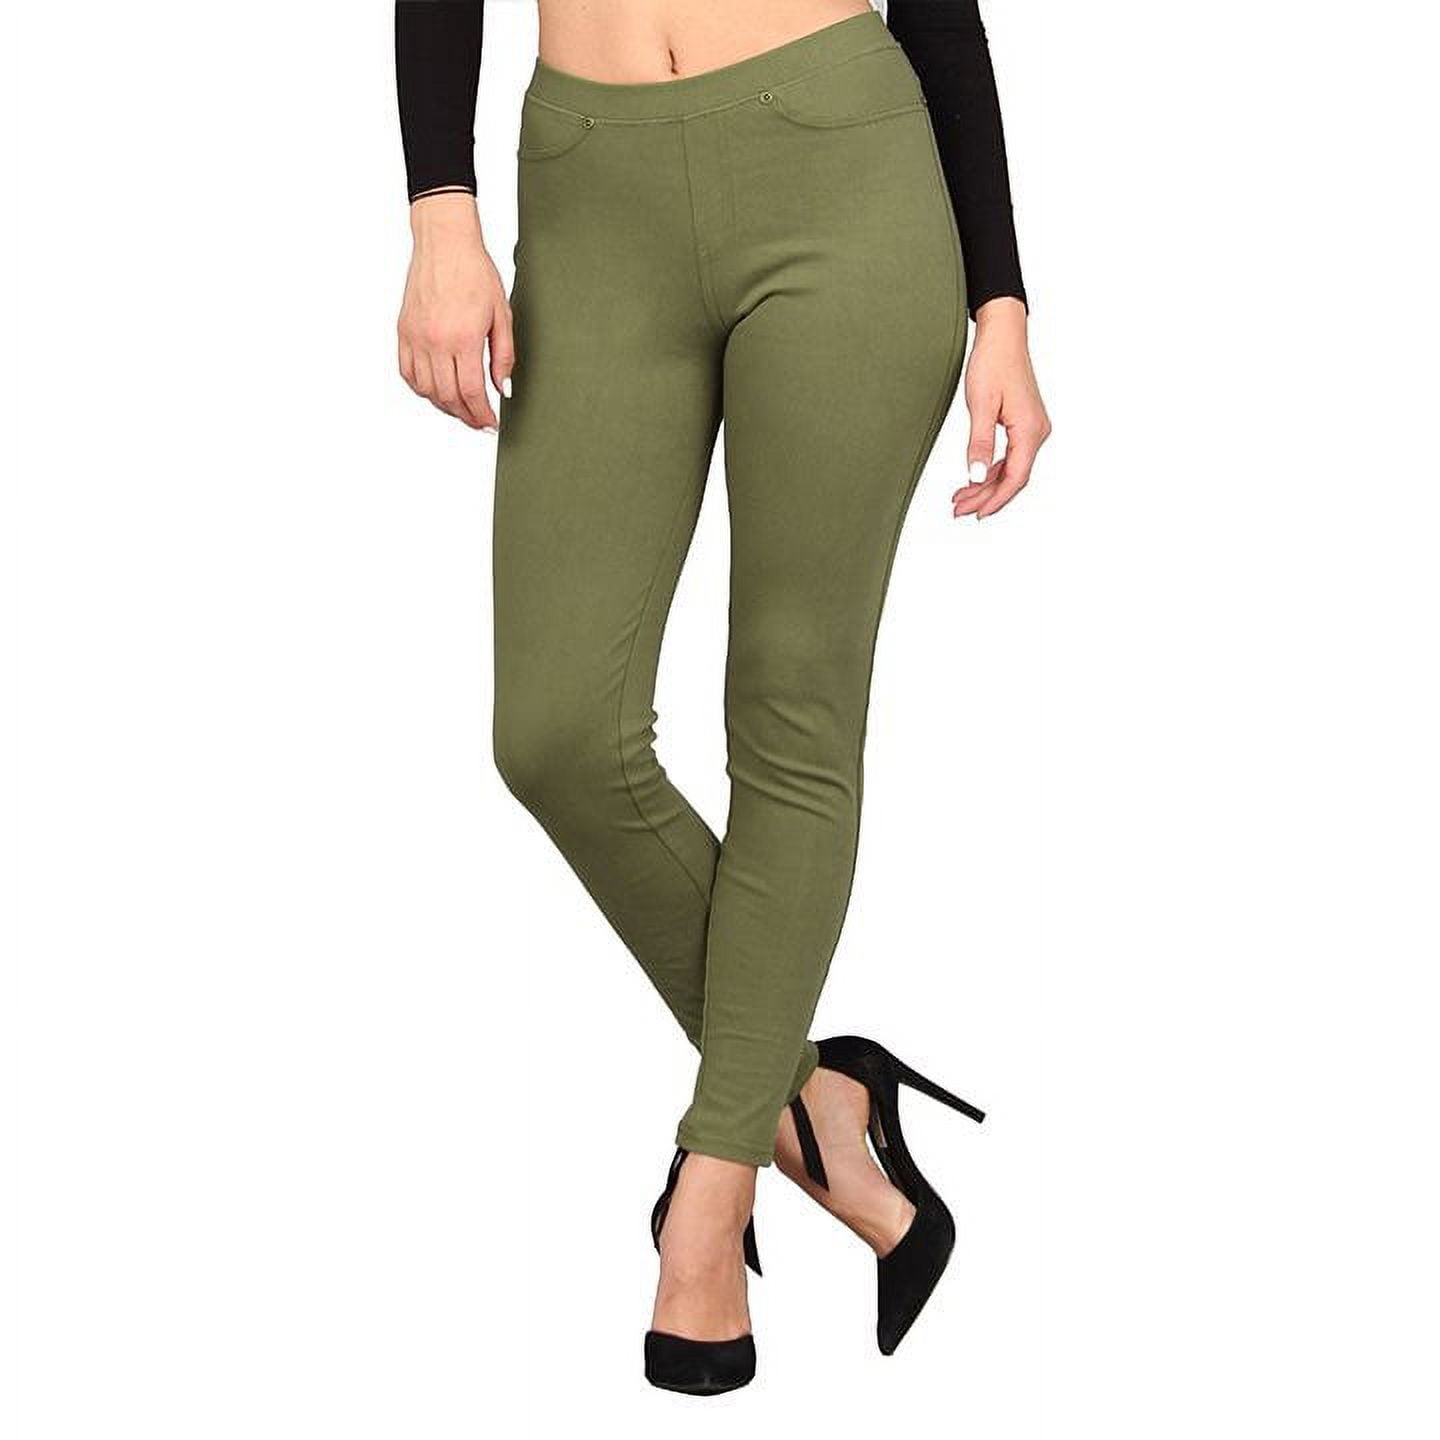 Buy Rani Fashion Check Jeggings for Women fit Combo jegging-pack